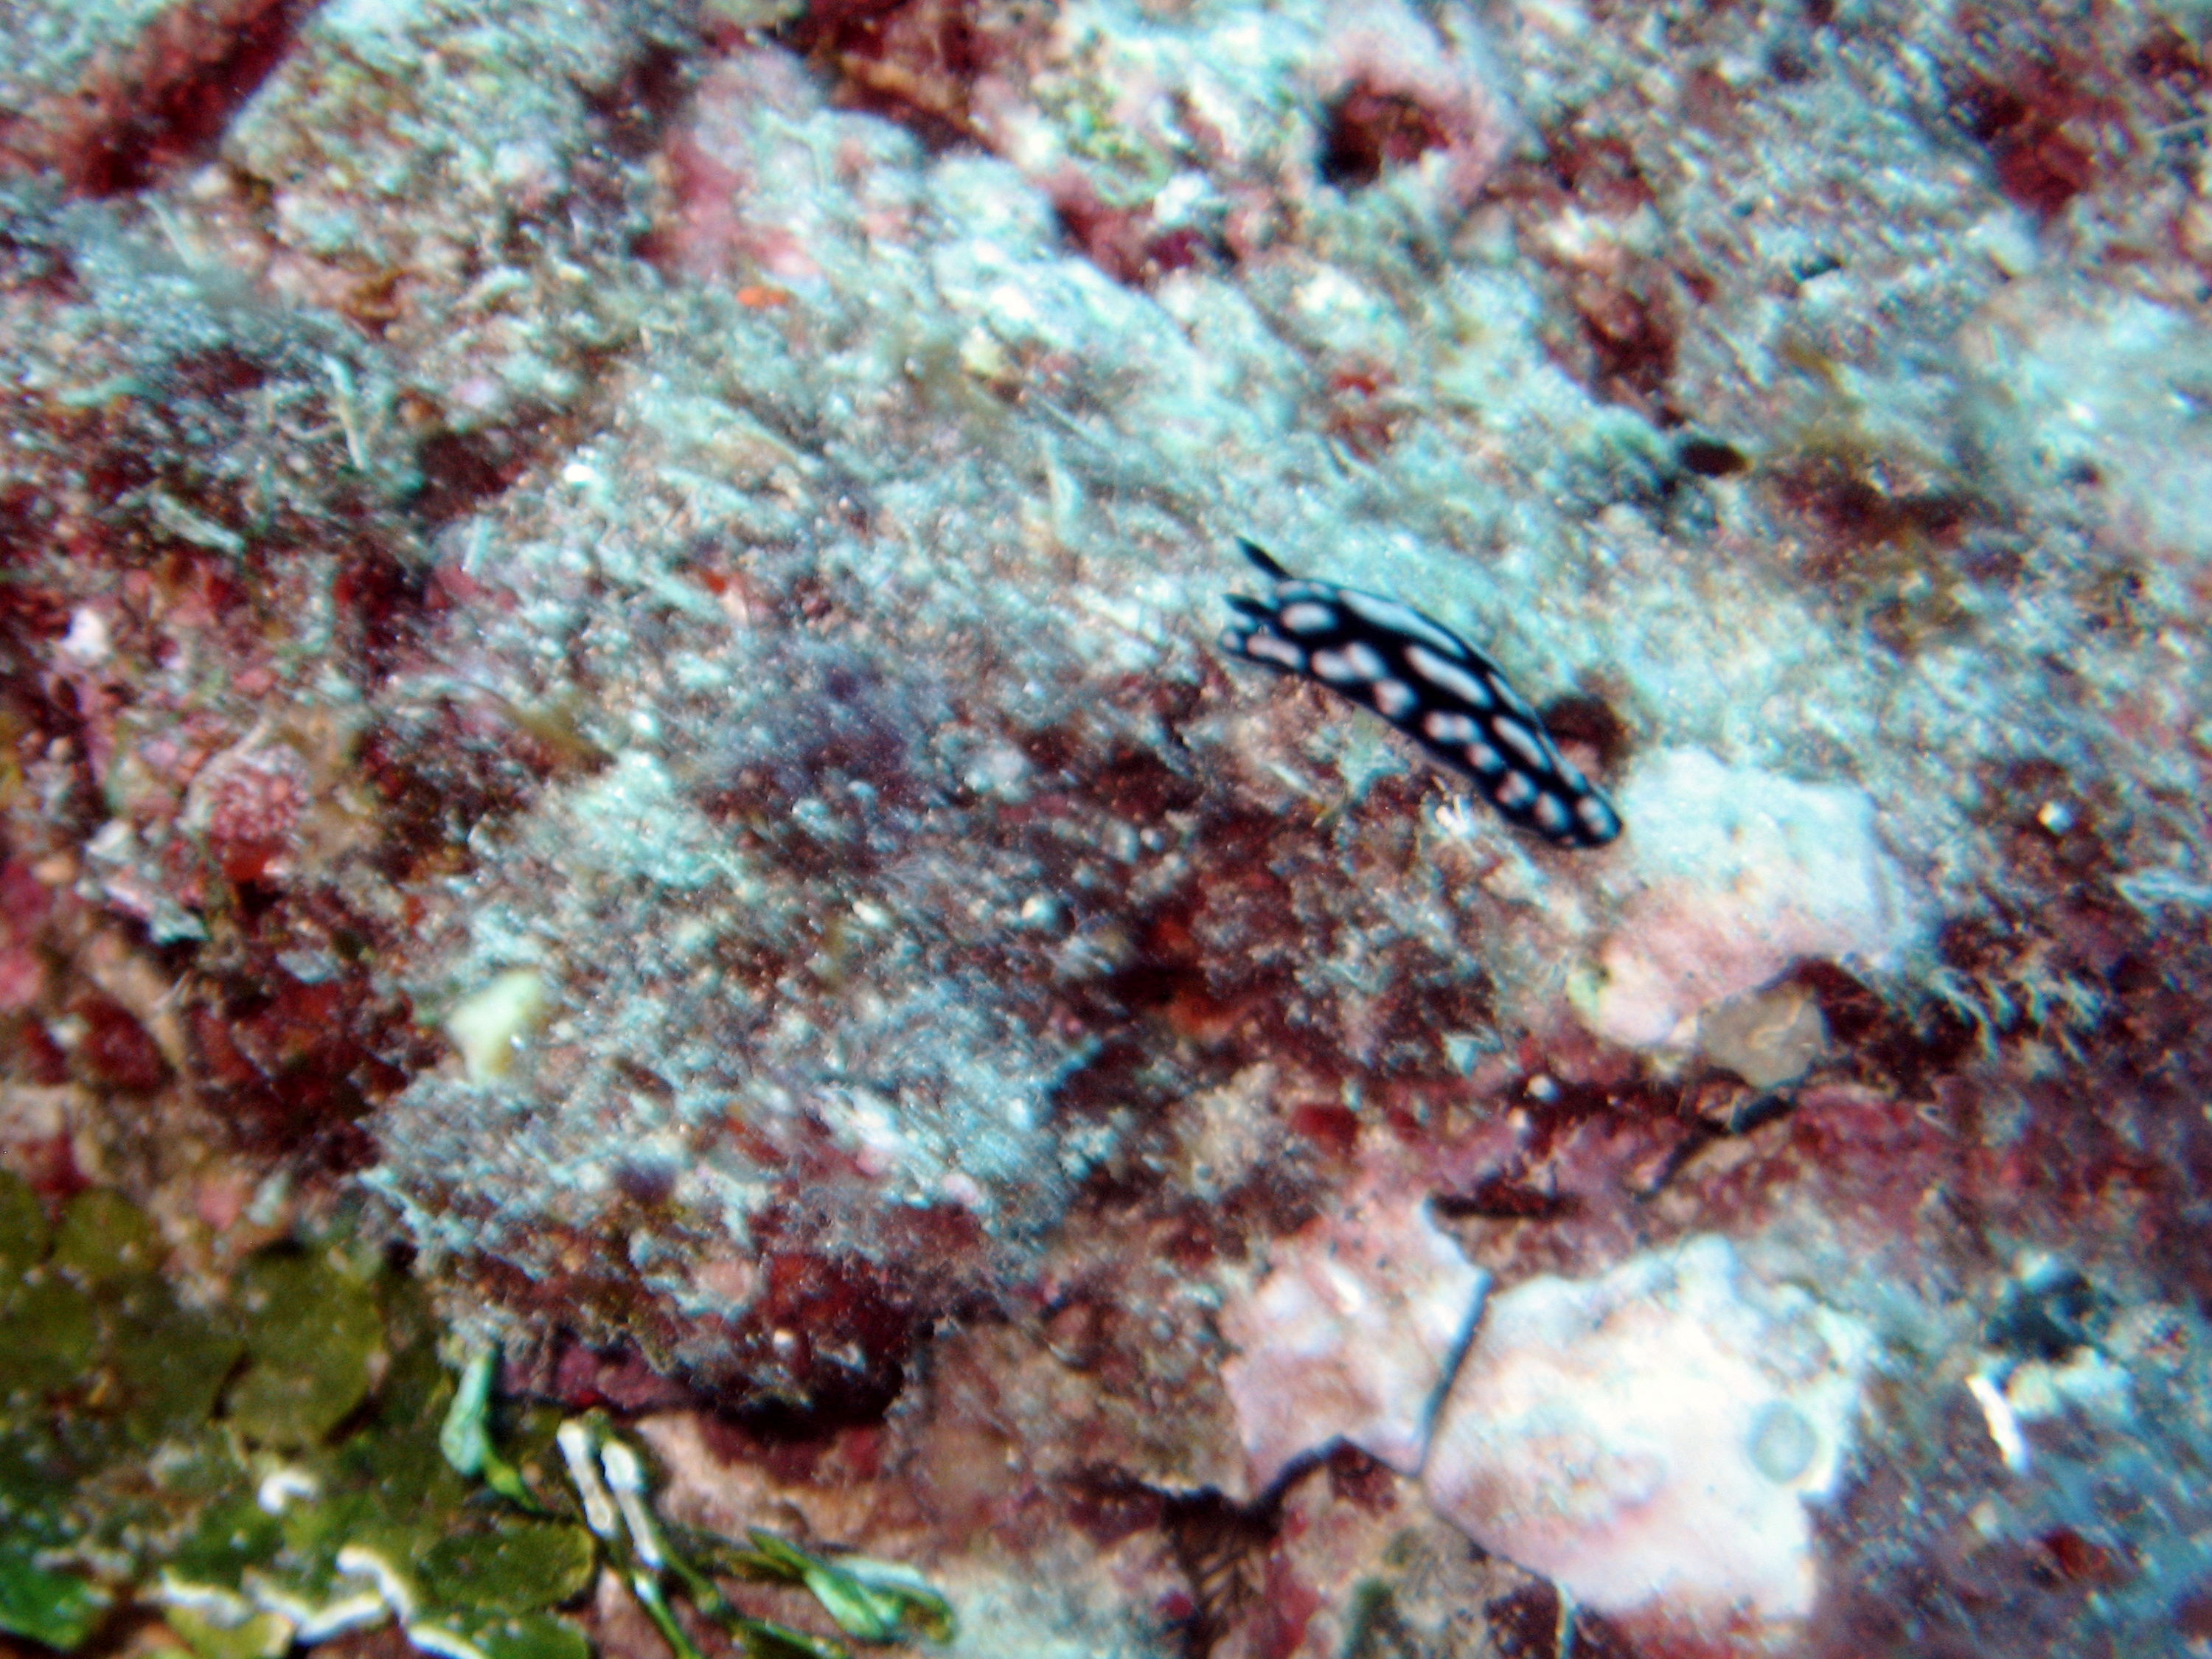 Black and white spotted nudi